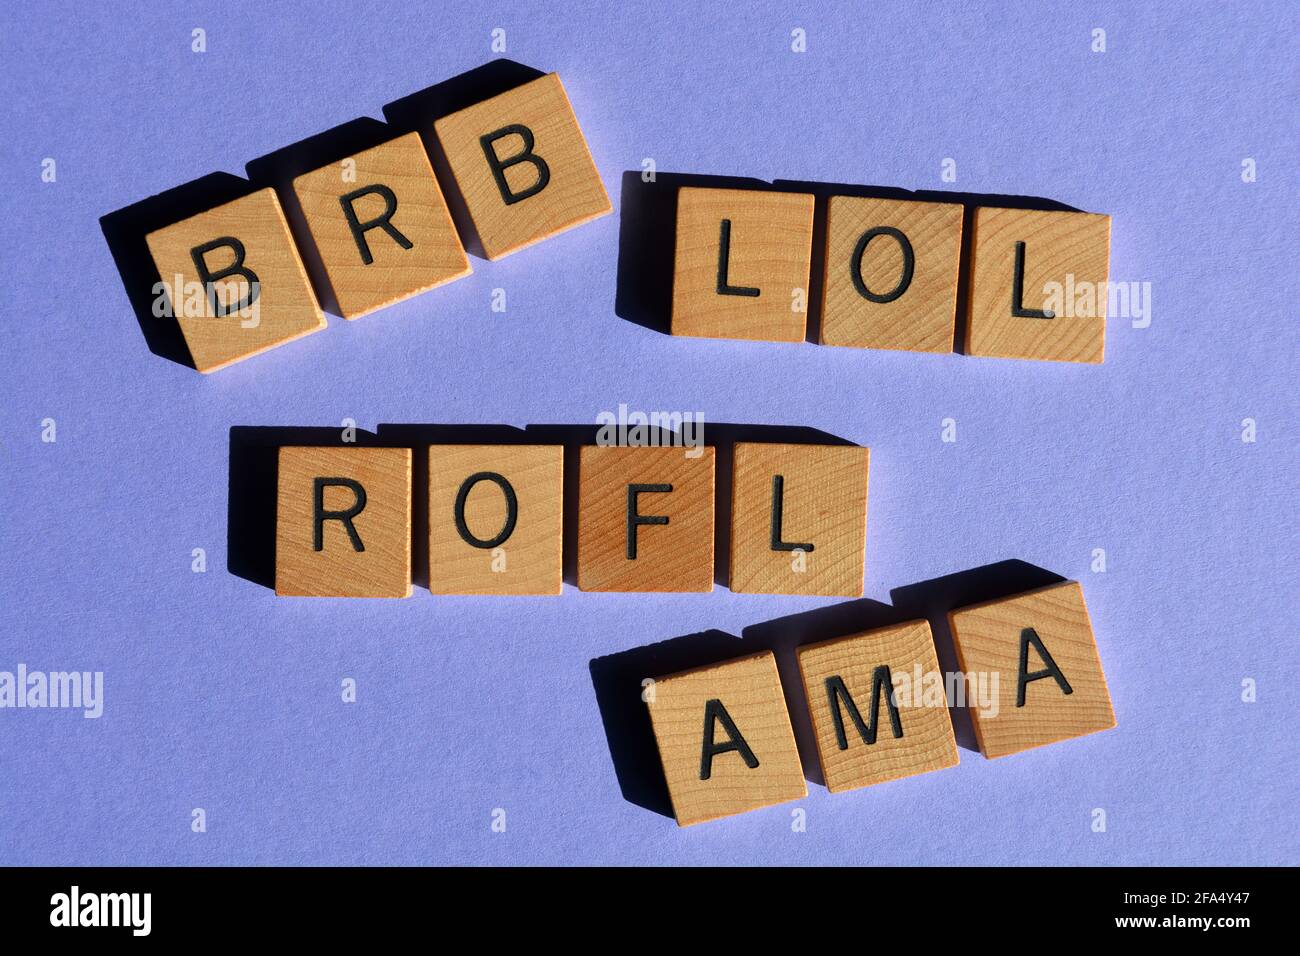 Acronyms used in text speak including BRB, LOL, ROFL and AMA,  or Ask Me Anything Stock Photo